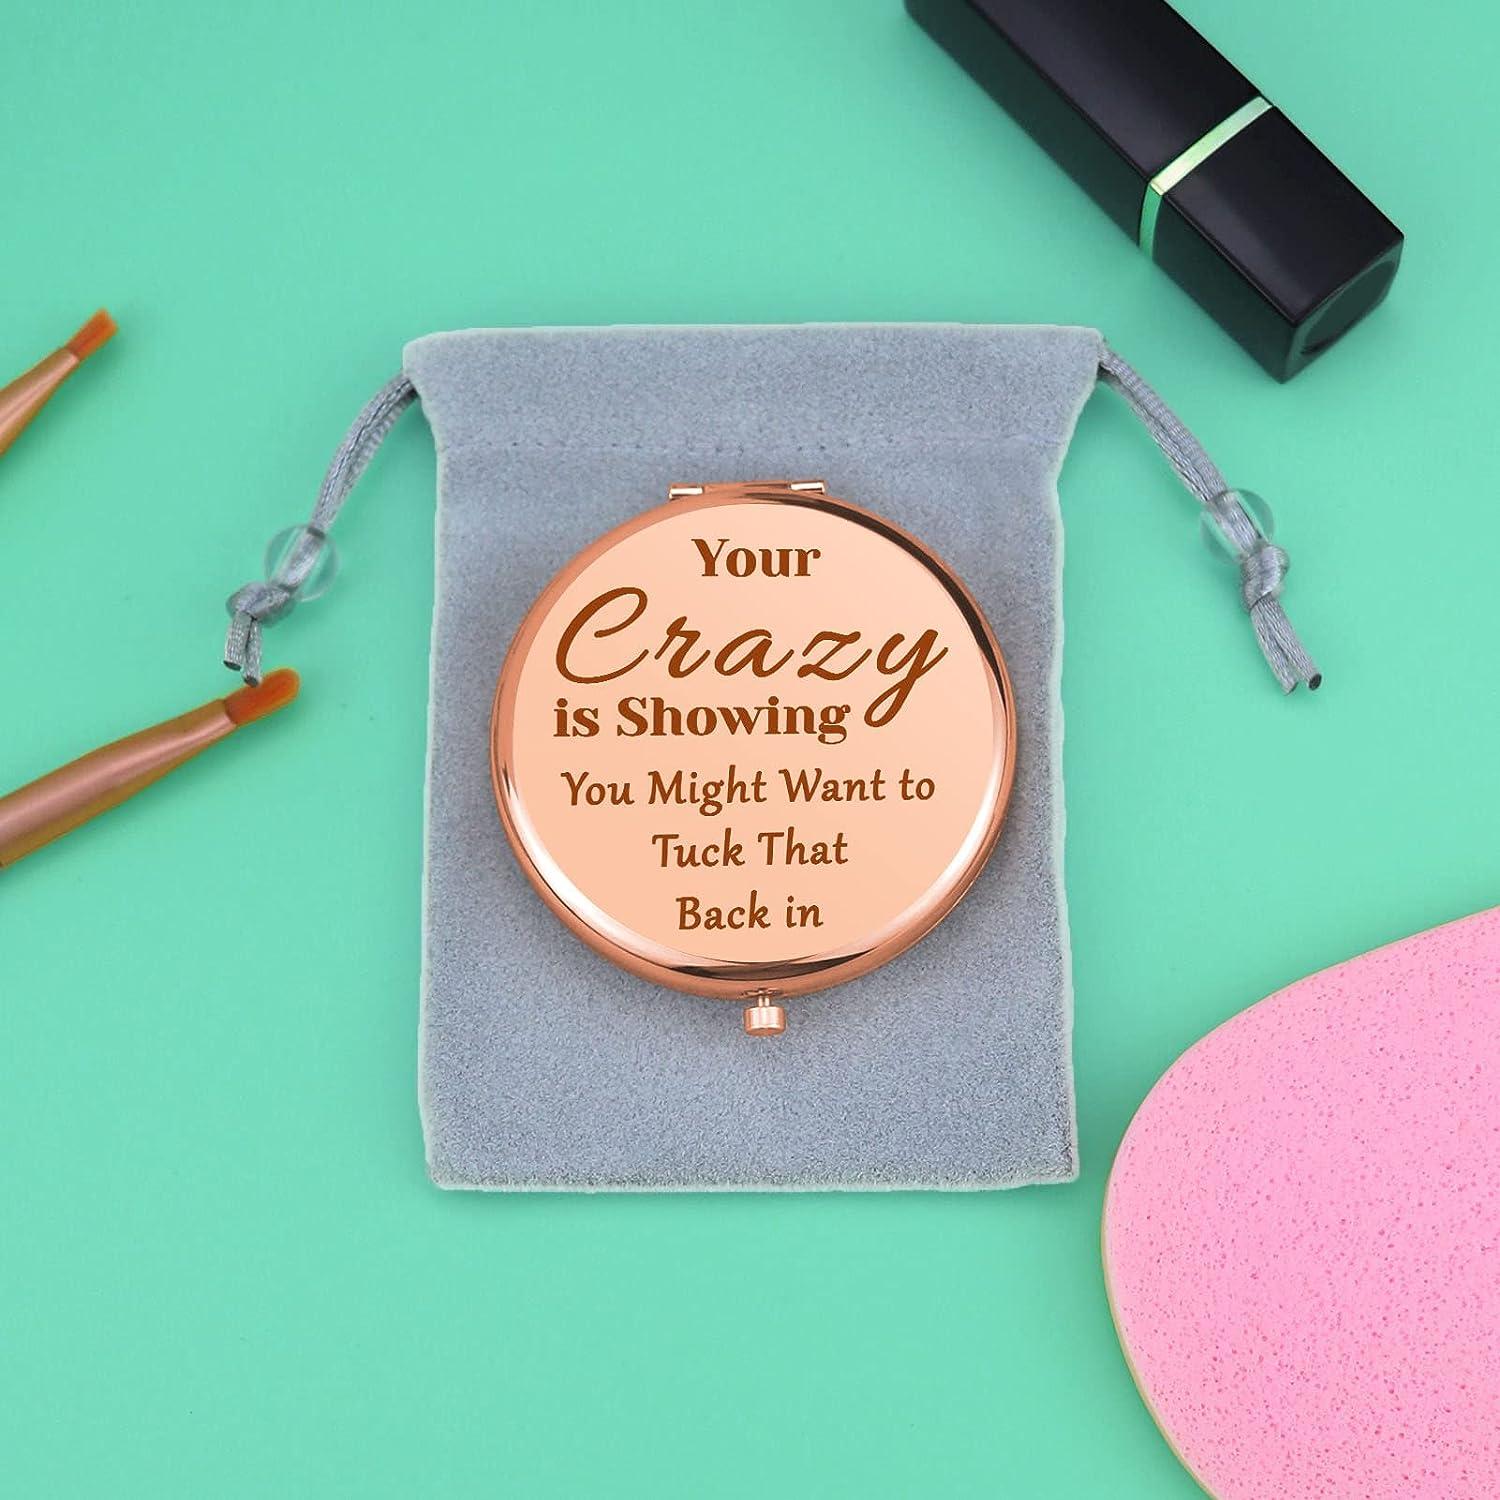 Funny Inspirational and Sarcasm Gifts for Women Compact Makeup Mirror for  Friends Coworker Funny Gifts for Women Folding Makeup Mirror for Boss  Colleagues Christmas Birthday Gifts